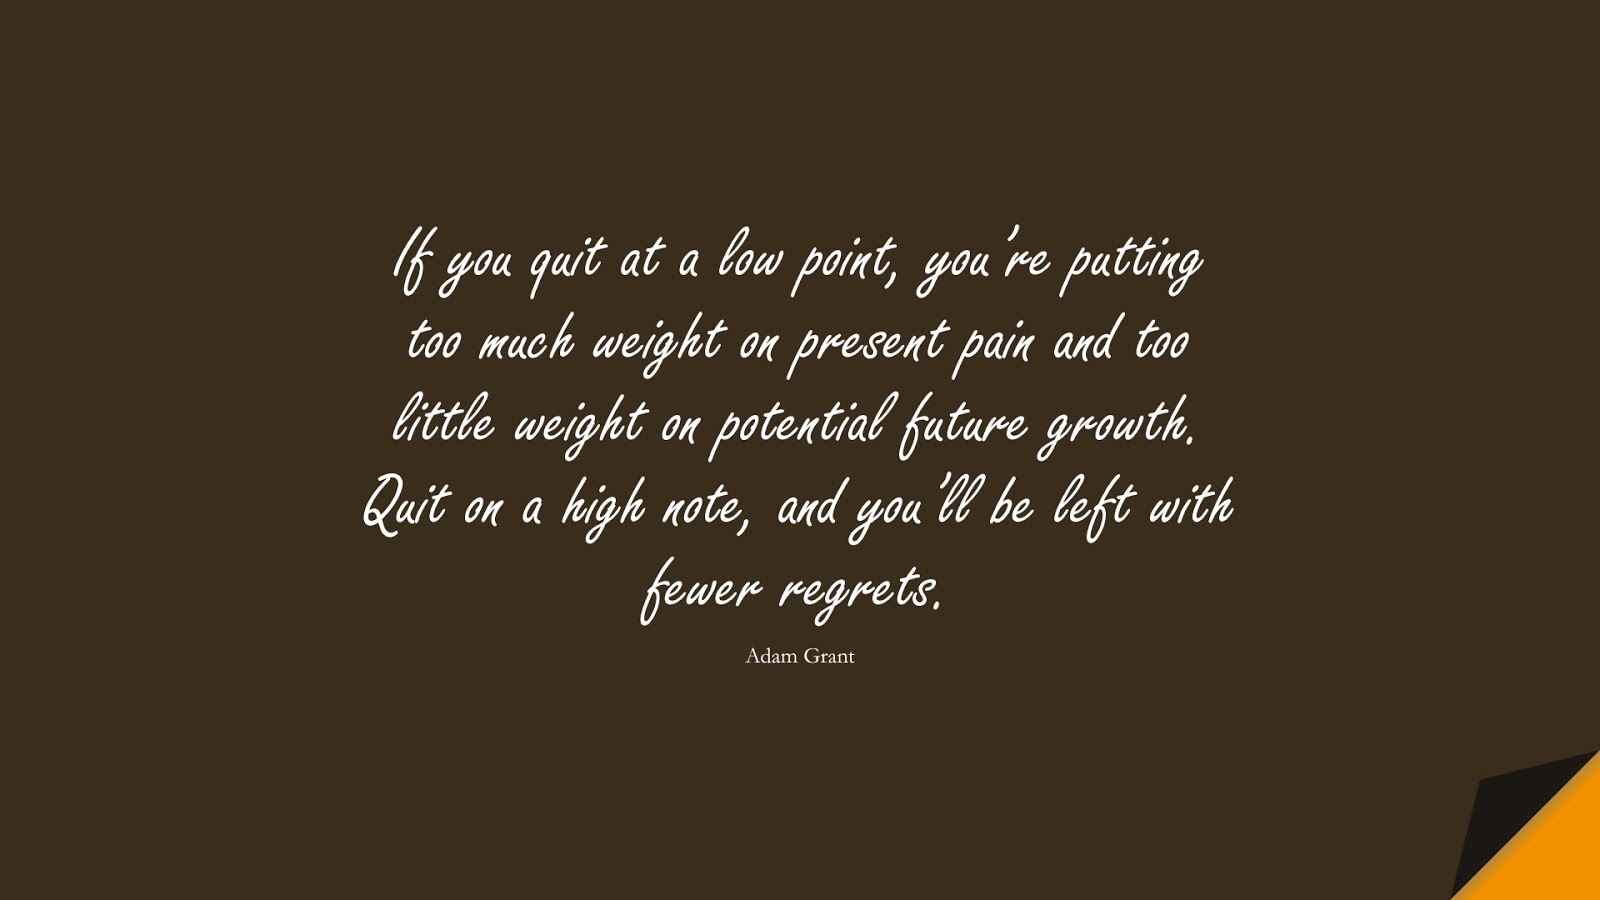 If you quit at a low point, you’re putting too much weight on present pain and too little weight on potential future growth. Quit on a high note, and you’ll be left with fewer regrets. (Adam Grant);  #NeverGiveUpQuotes